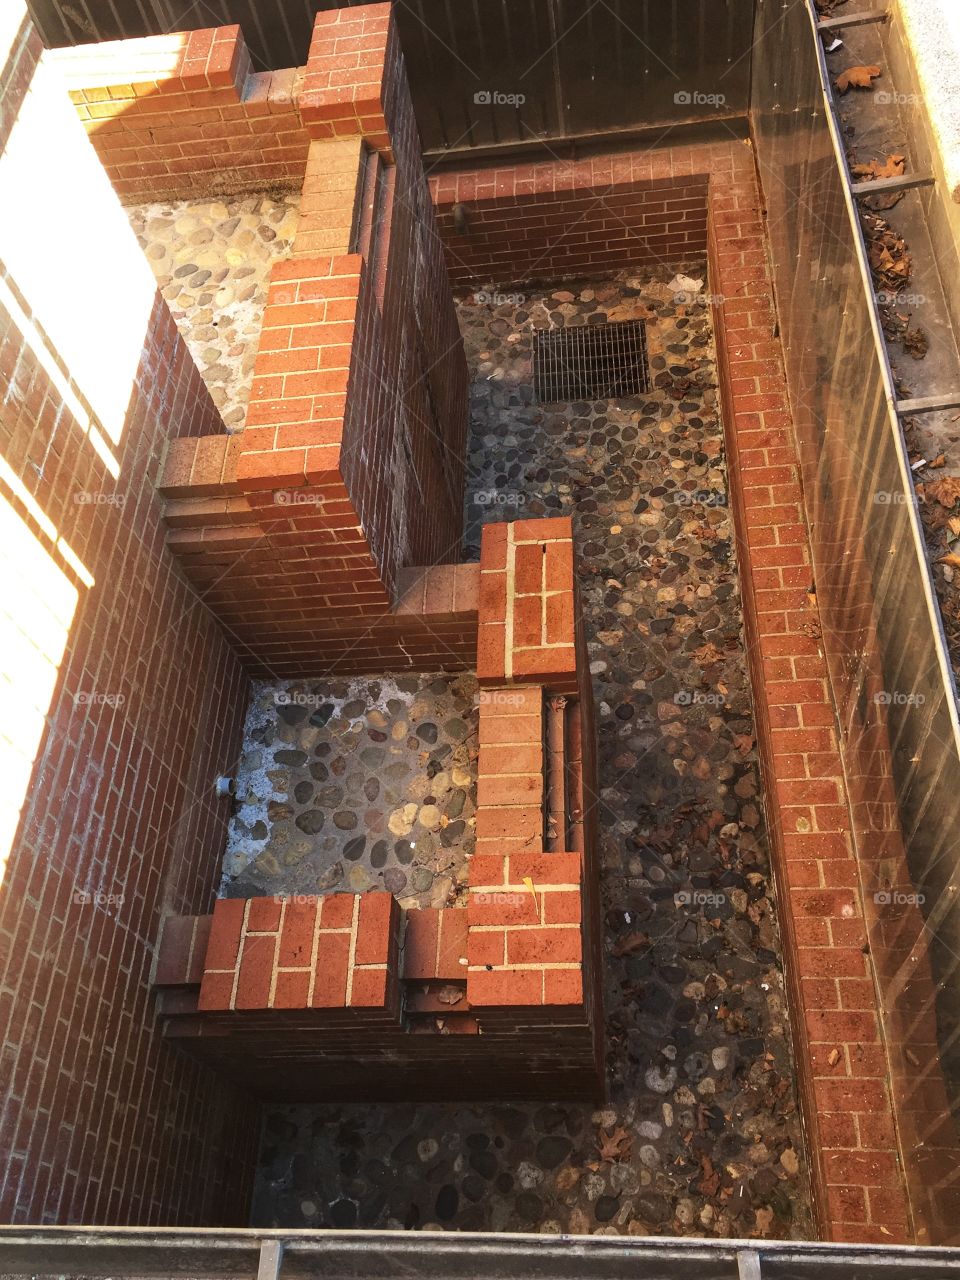 A brick work drainage area set in a deep covered with a stone work floor. There is a drainage grill visible.